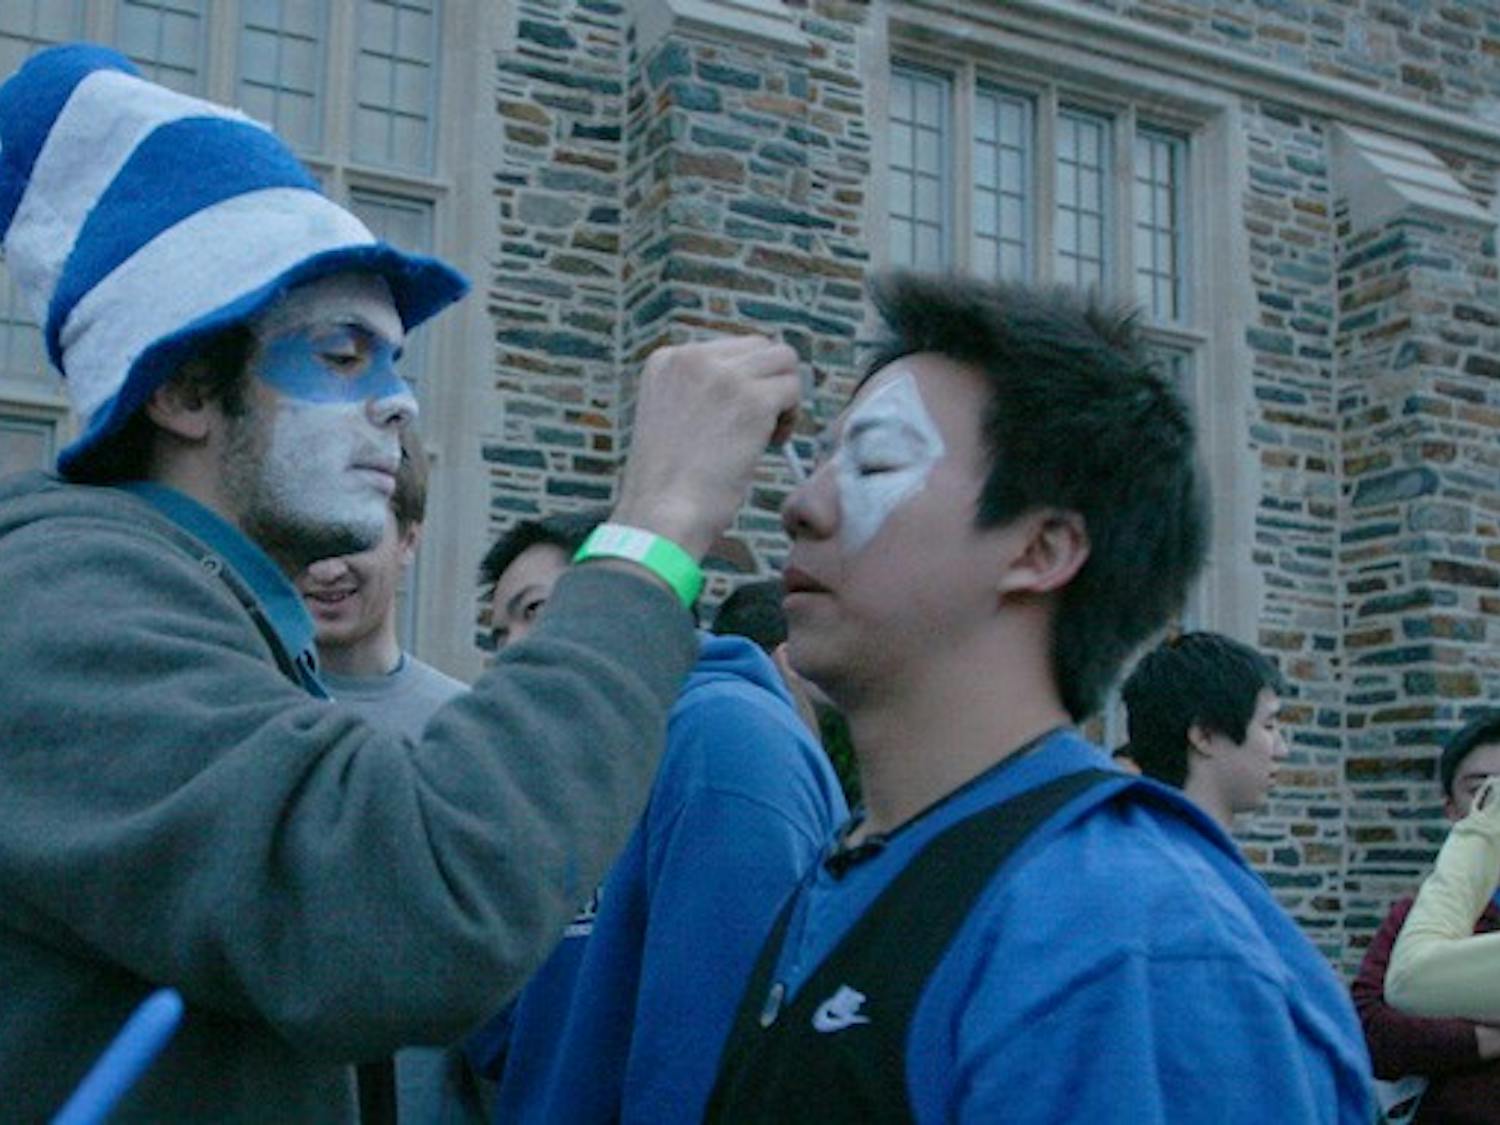 Students who choose to wait in the walk-up line are not guaranteed admission to the Duke-North Carolina game.